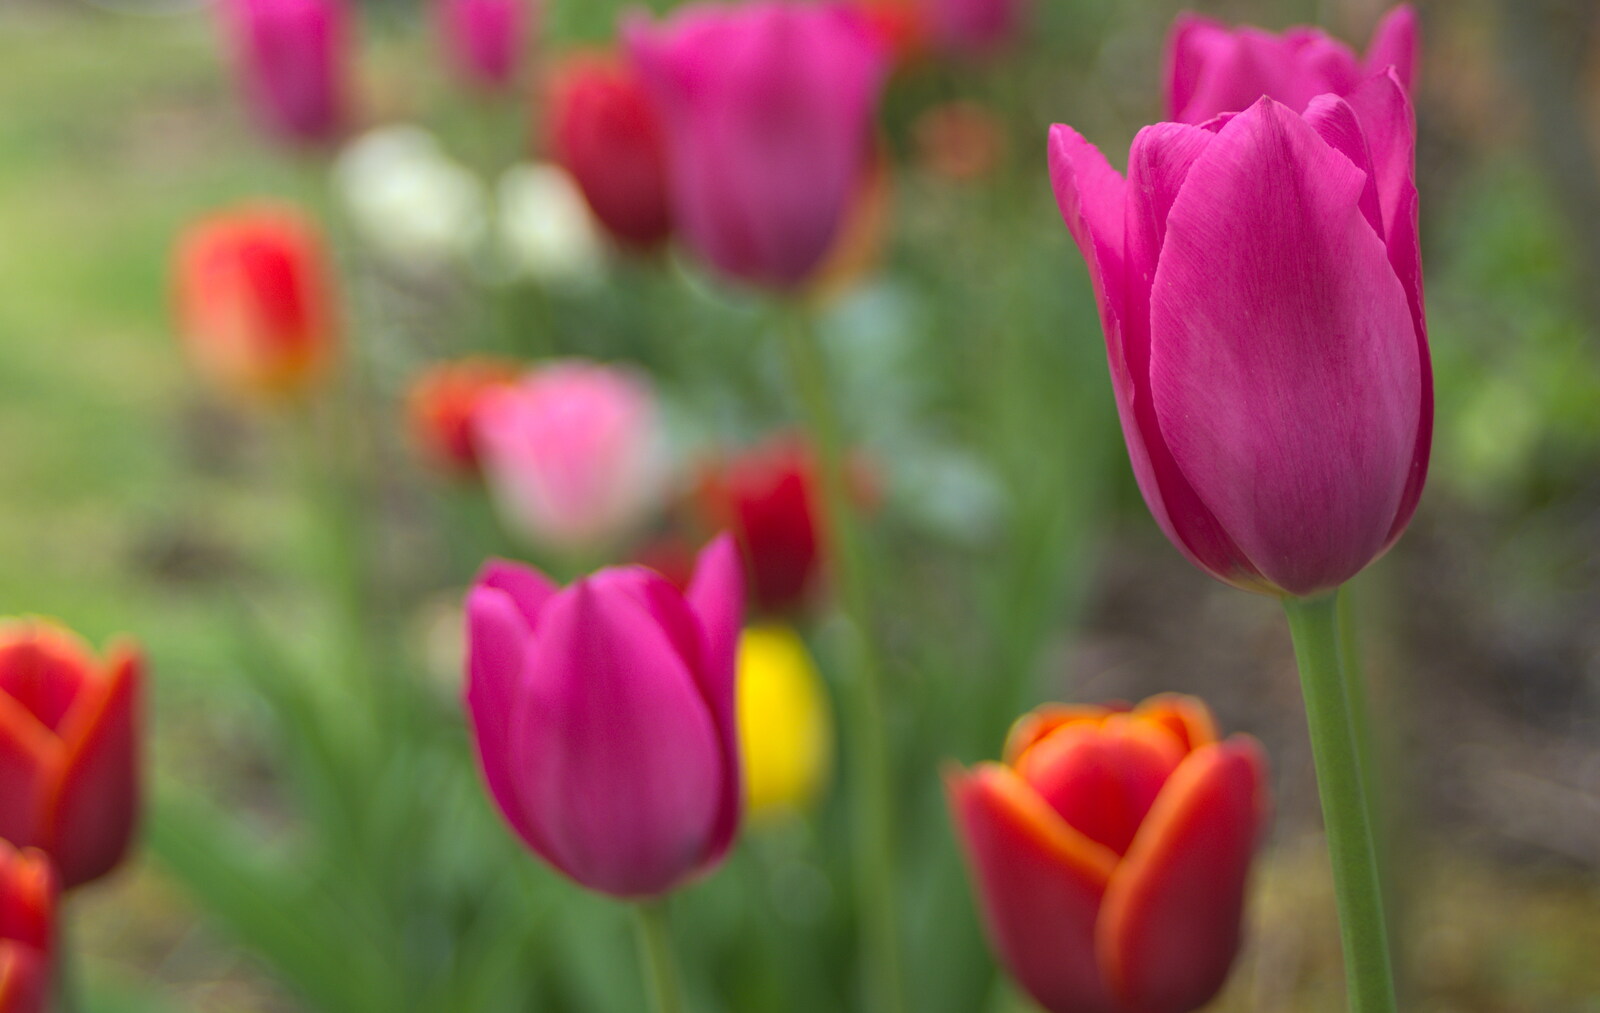 Close-up of Grandad's tulips from Bank Holiday Flowers, Brome, Suffolk - 6th May 2013